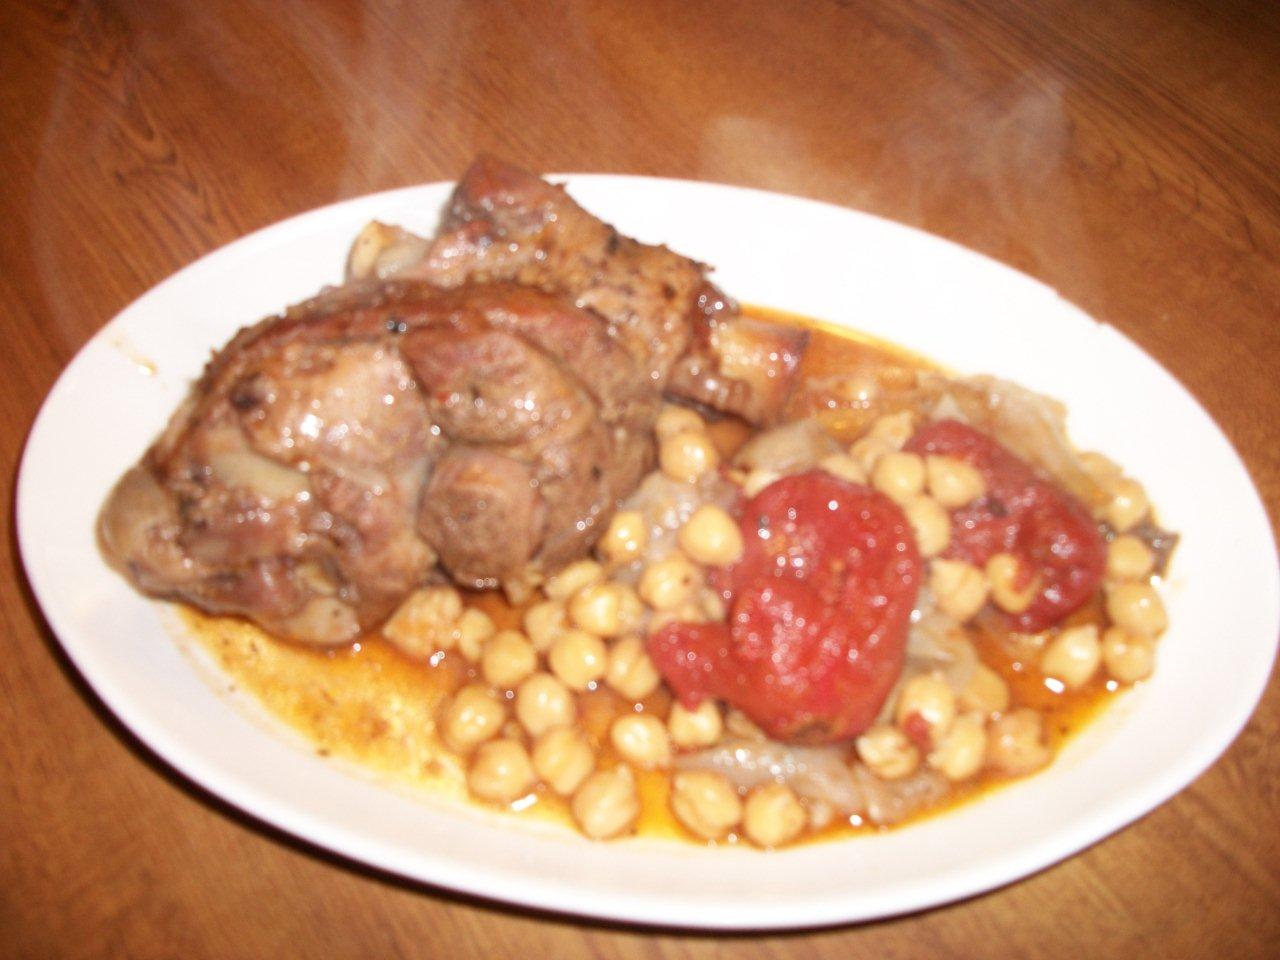 Click to enlarge - Braised lamb shanks with chick peas.